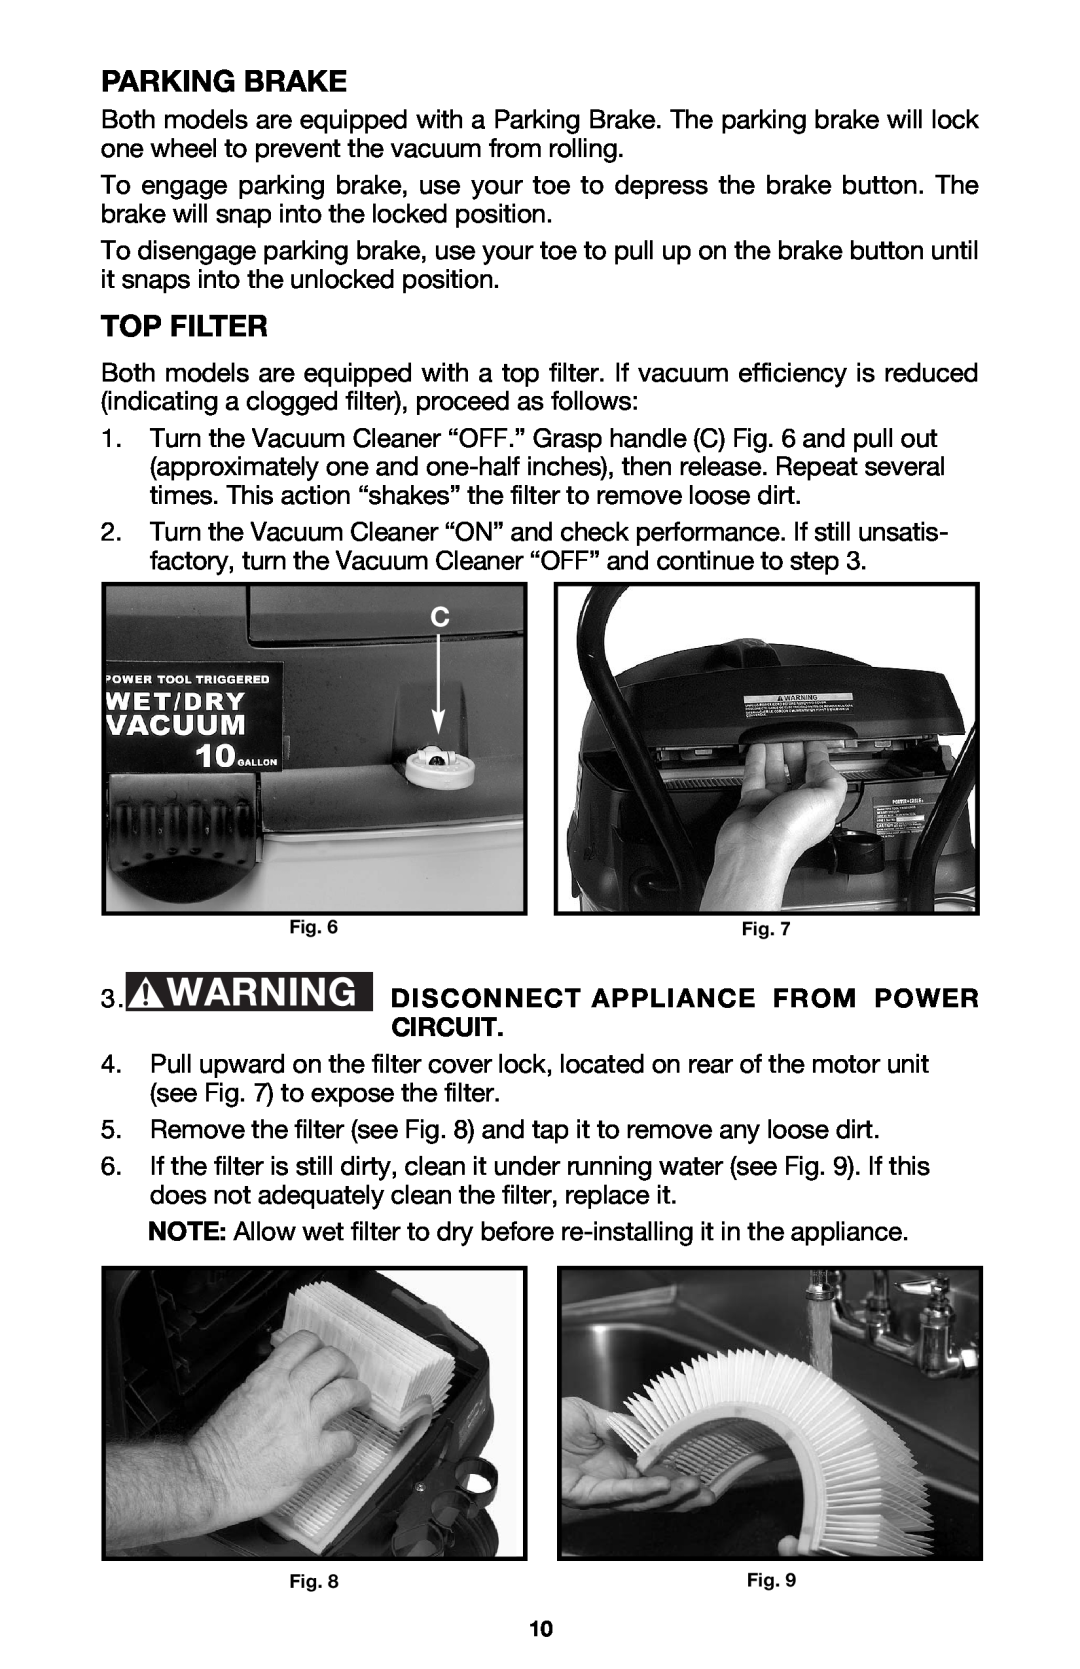 Porter-Cable 7814 instruction manual Parking Brake, Top Filter, Disconnect Appliance From Power, Circuit 